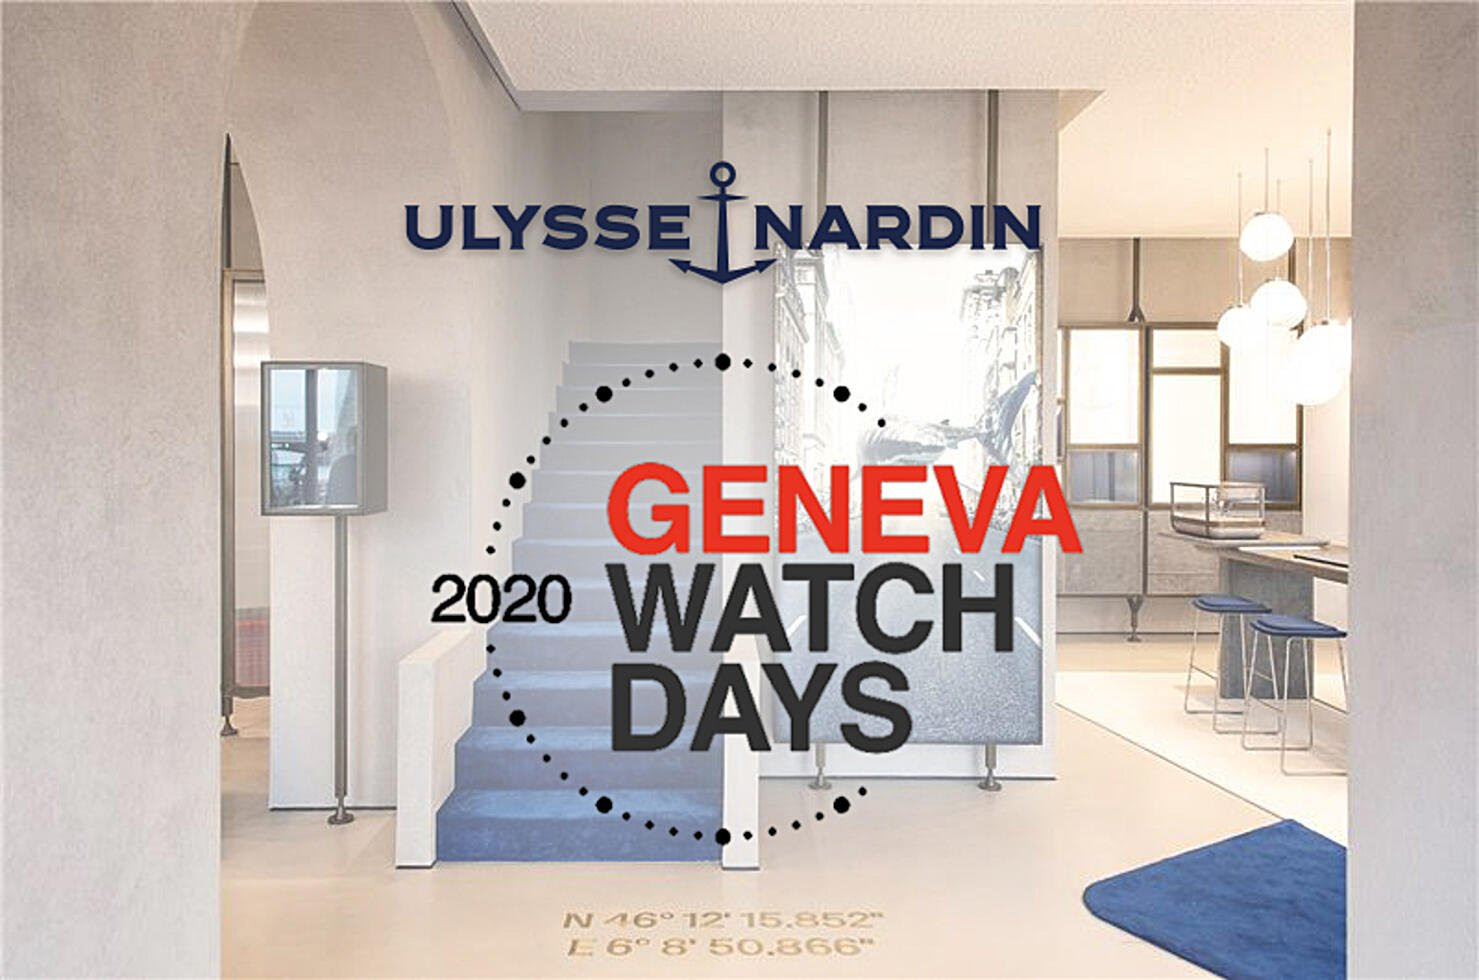 Several Major Luxury Watch Brands Promise To Exhibit In Late April At New Geneva Watch Days Event